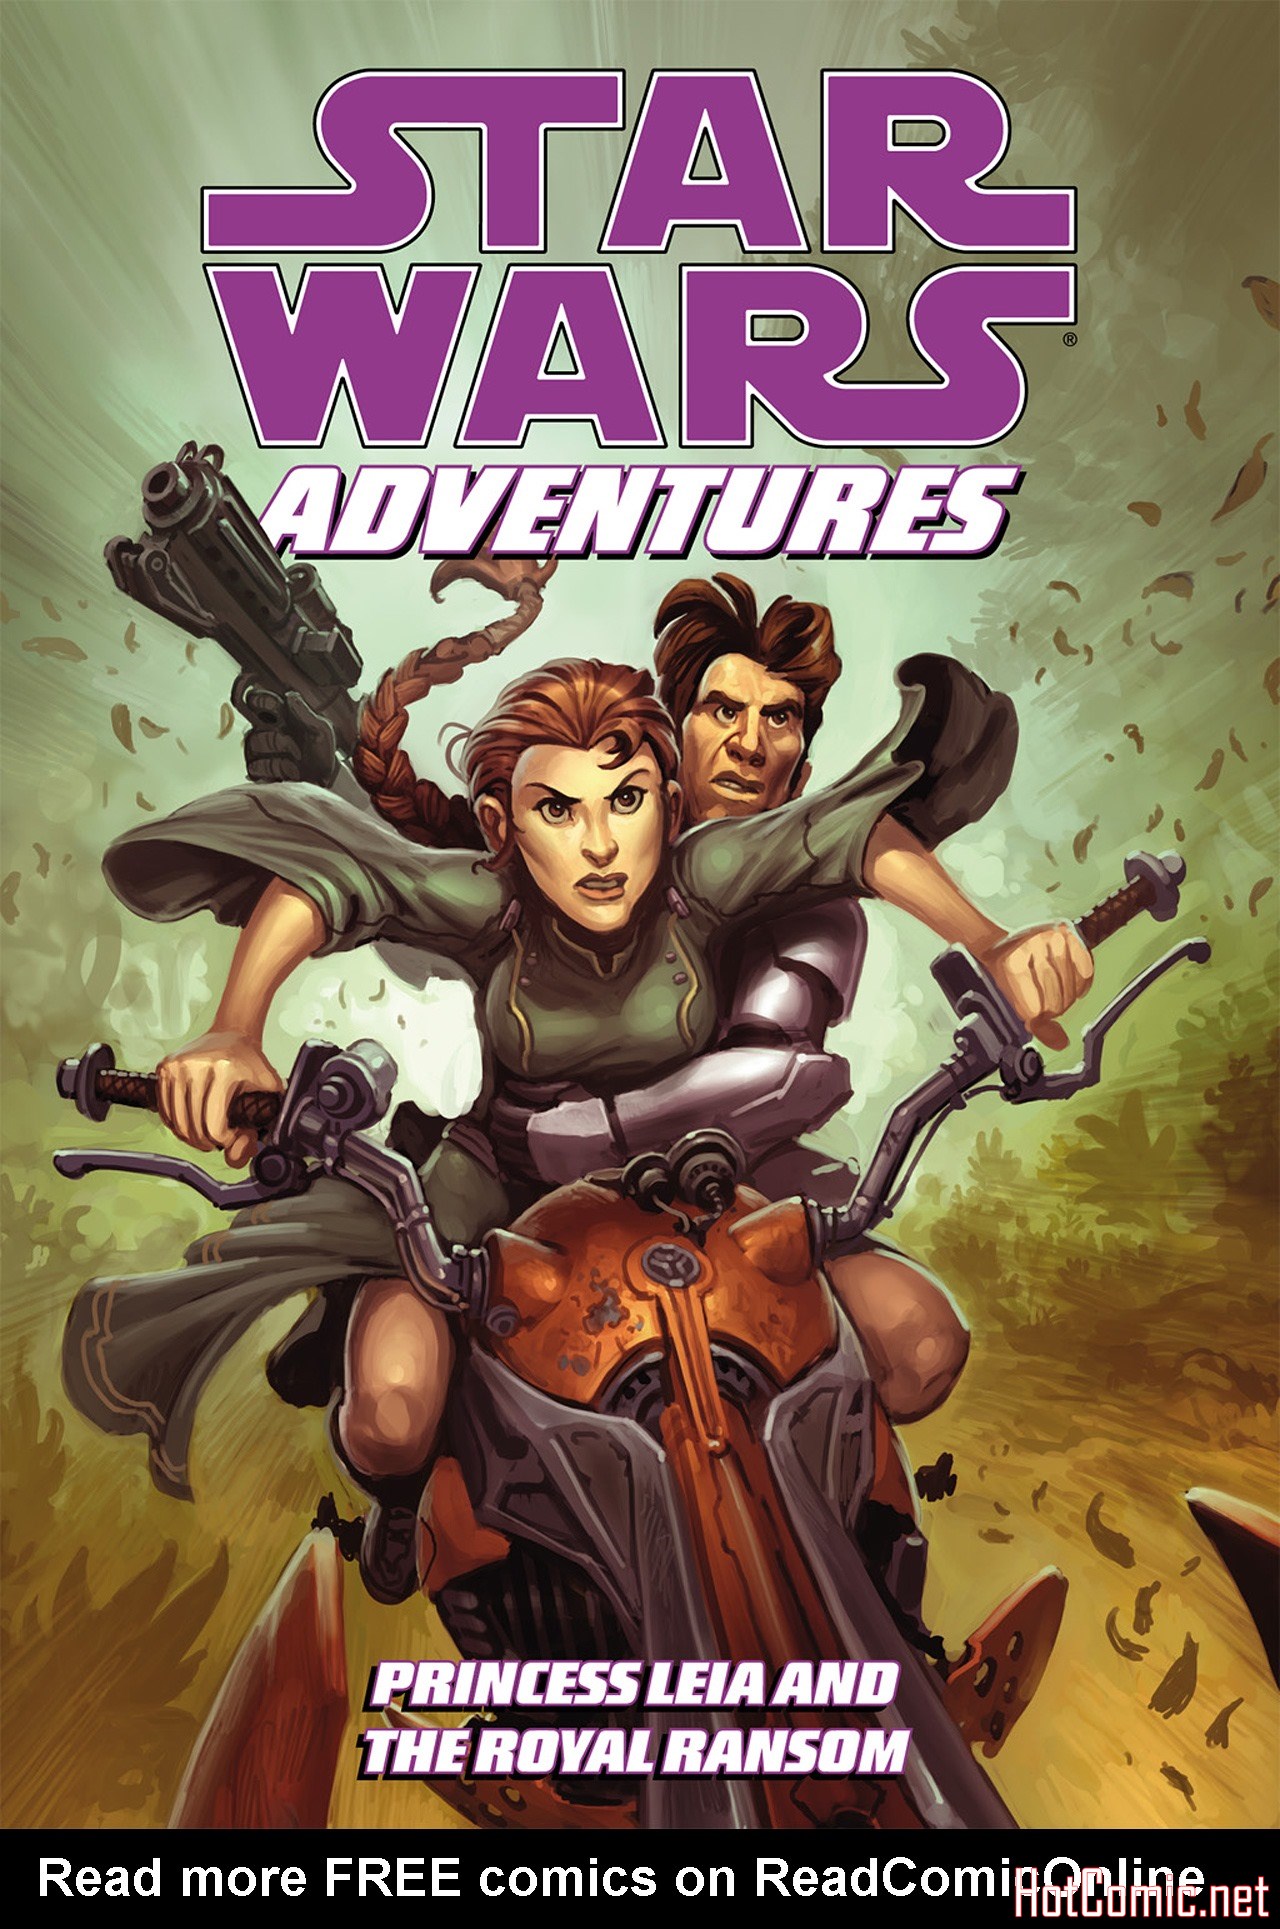 Princess Leia and the Royal Ransom - Star Wars Adventures